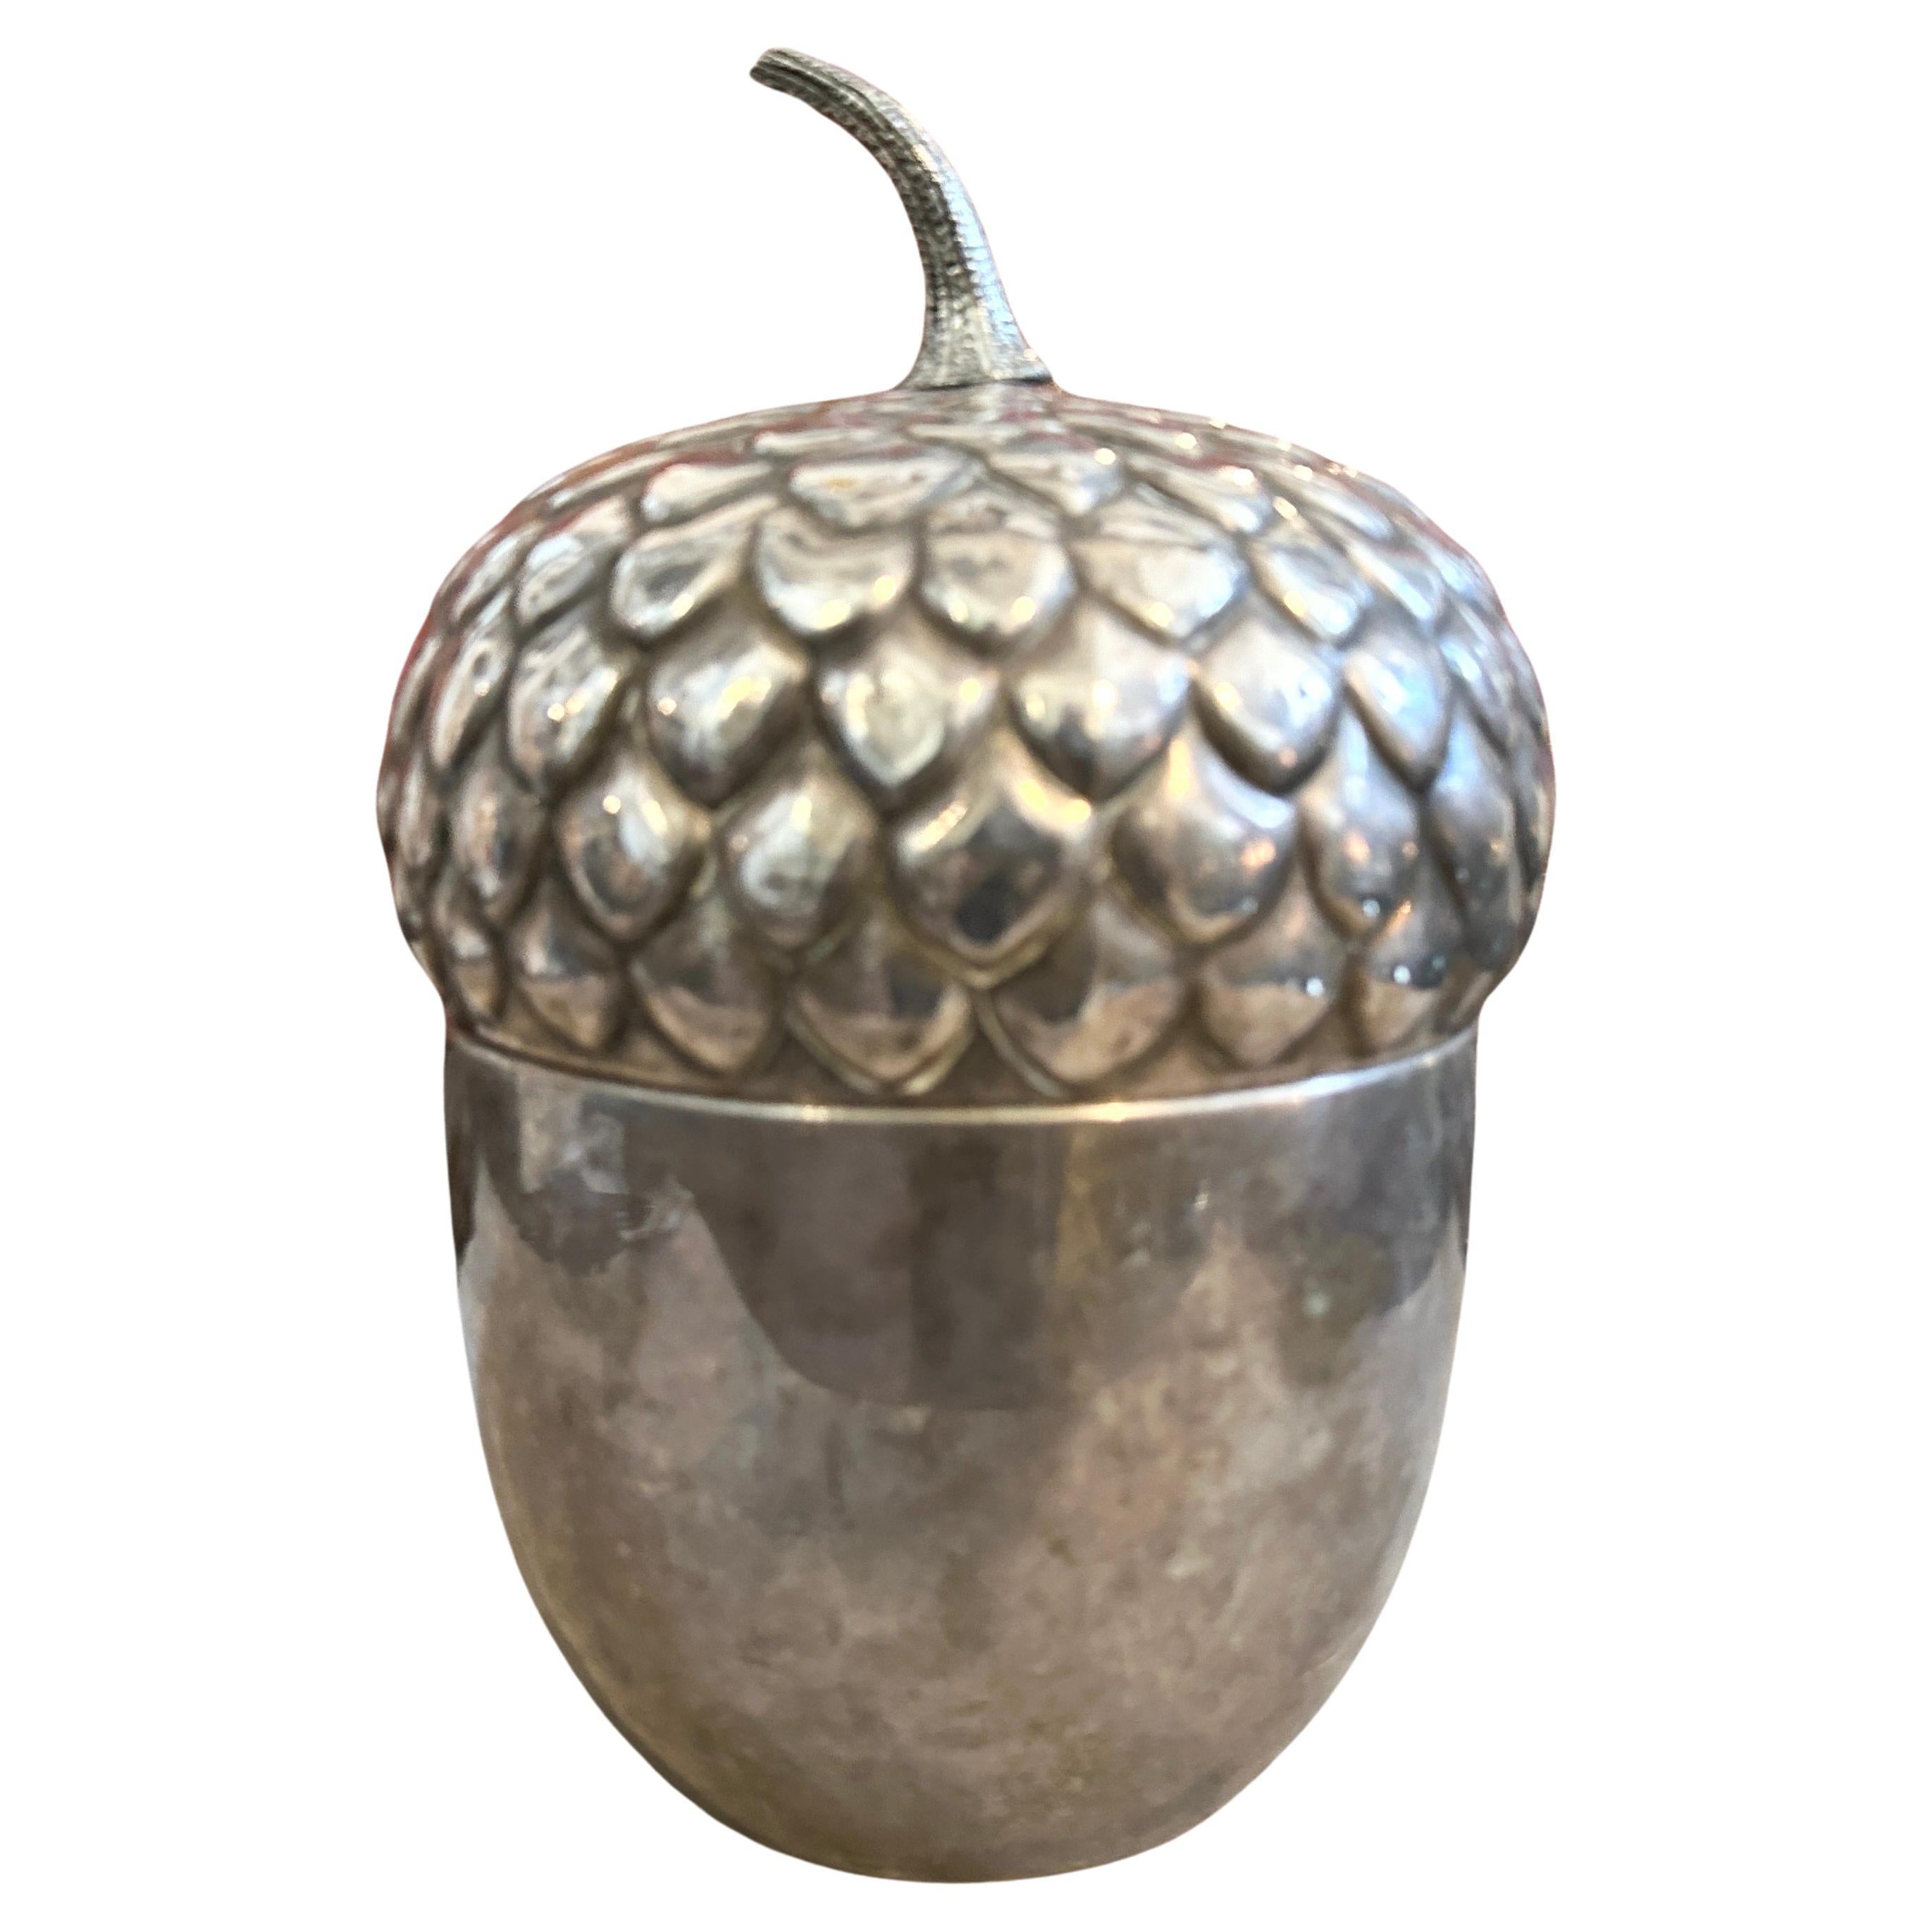 1970s Modernist Silver Plated Acorn Shaped Ice Bucket by Teghini Firenze